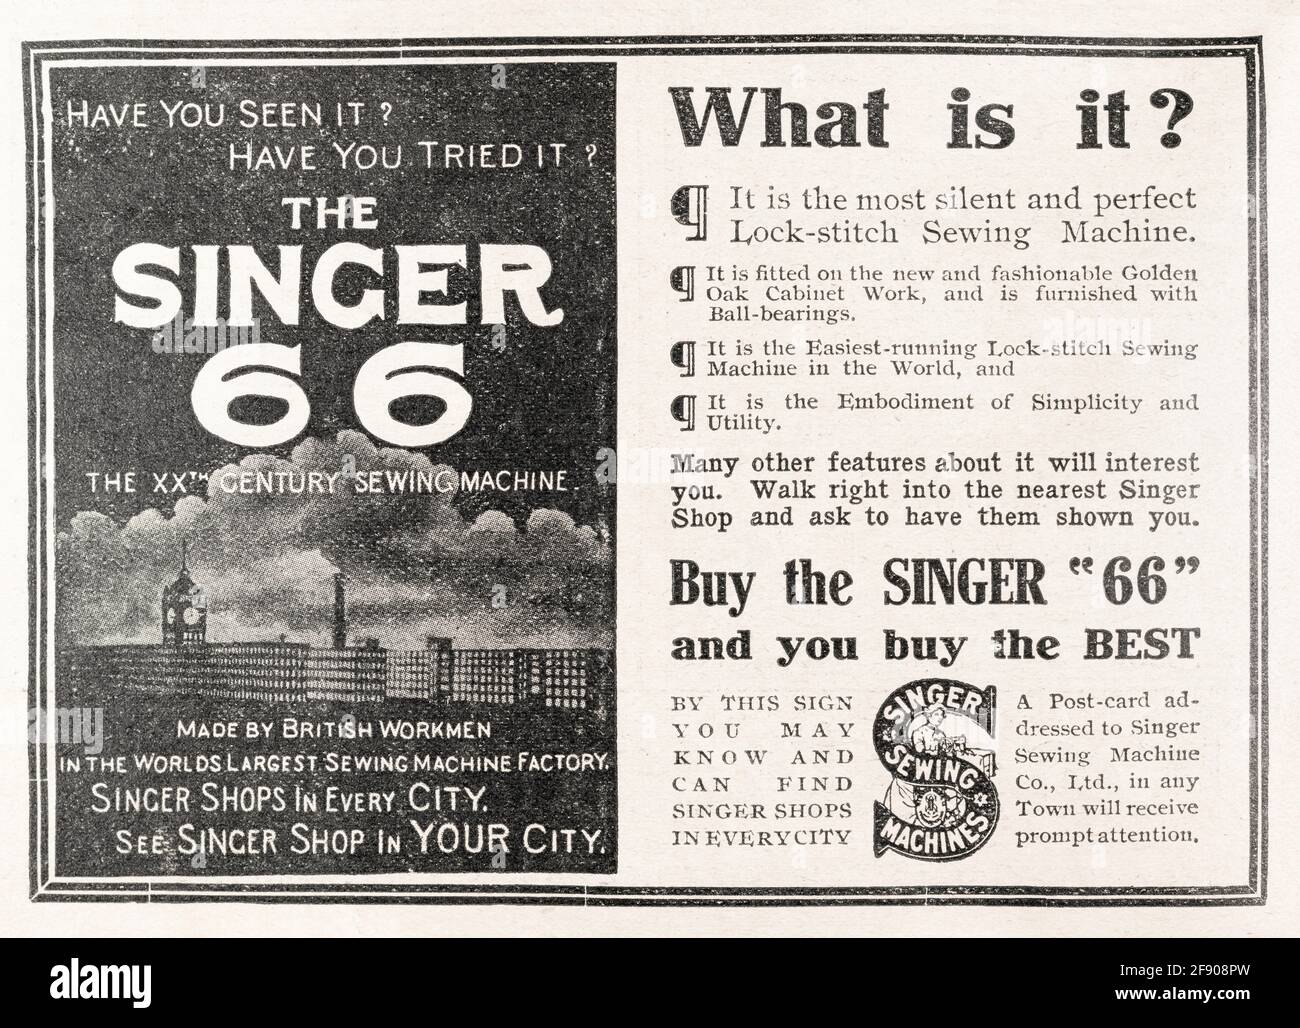 Old vintage Victorian Singer 66 sewing machine advert from 1907 - pre advertising standards. History of advertising, old adverts, advertising history. Stock Photo